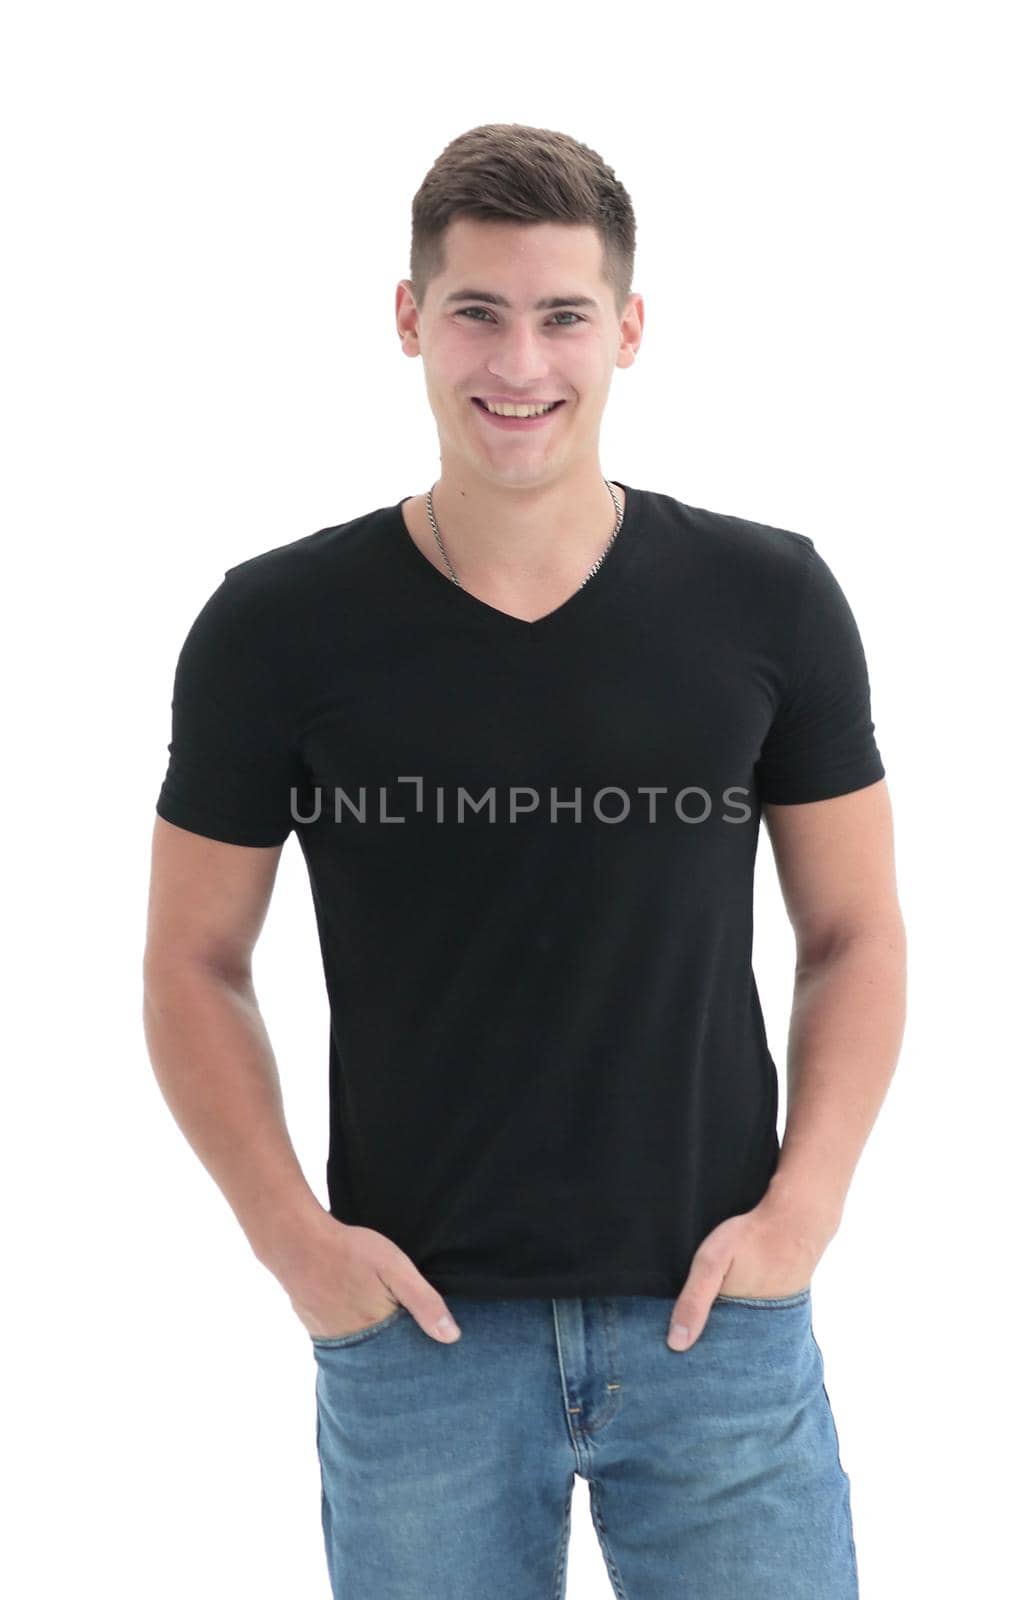 in full growth. casual guy in black t-shirt by asdf